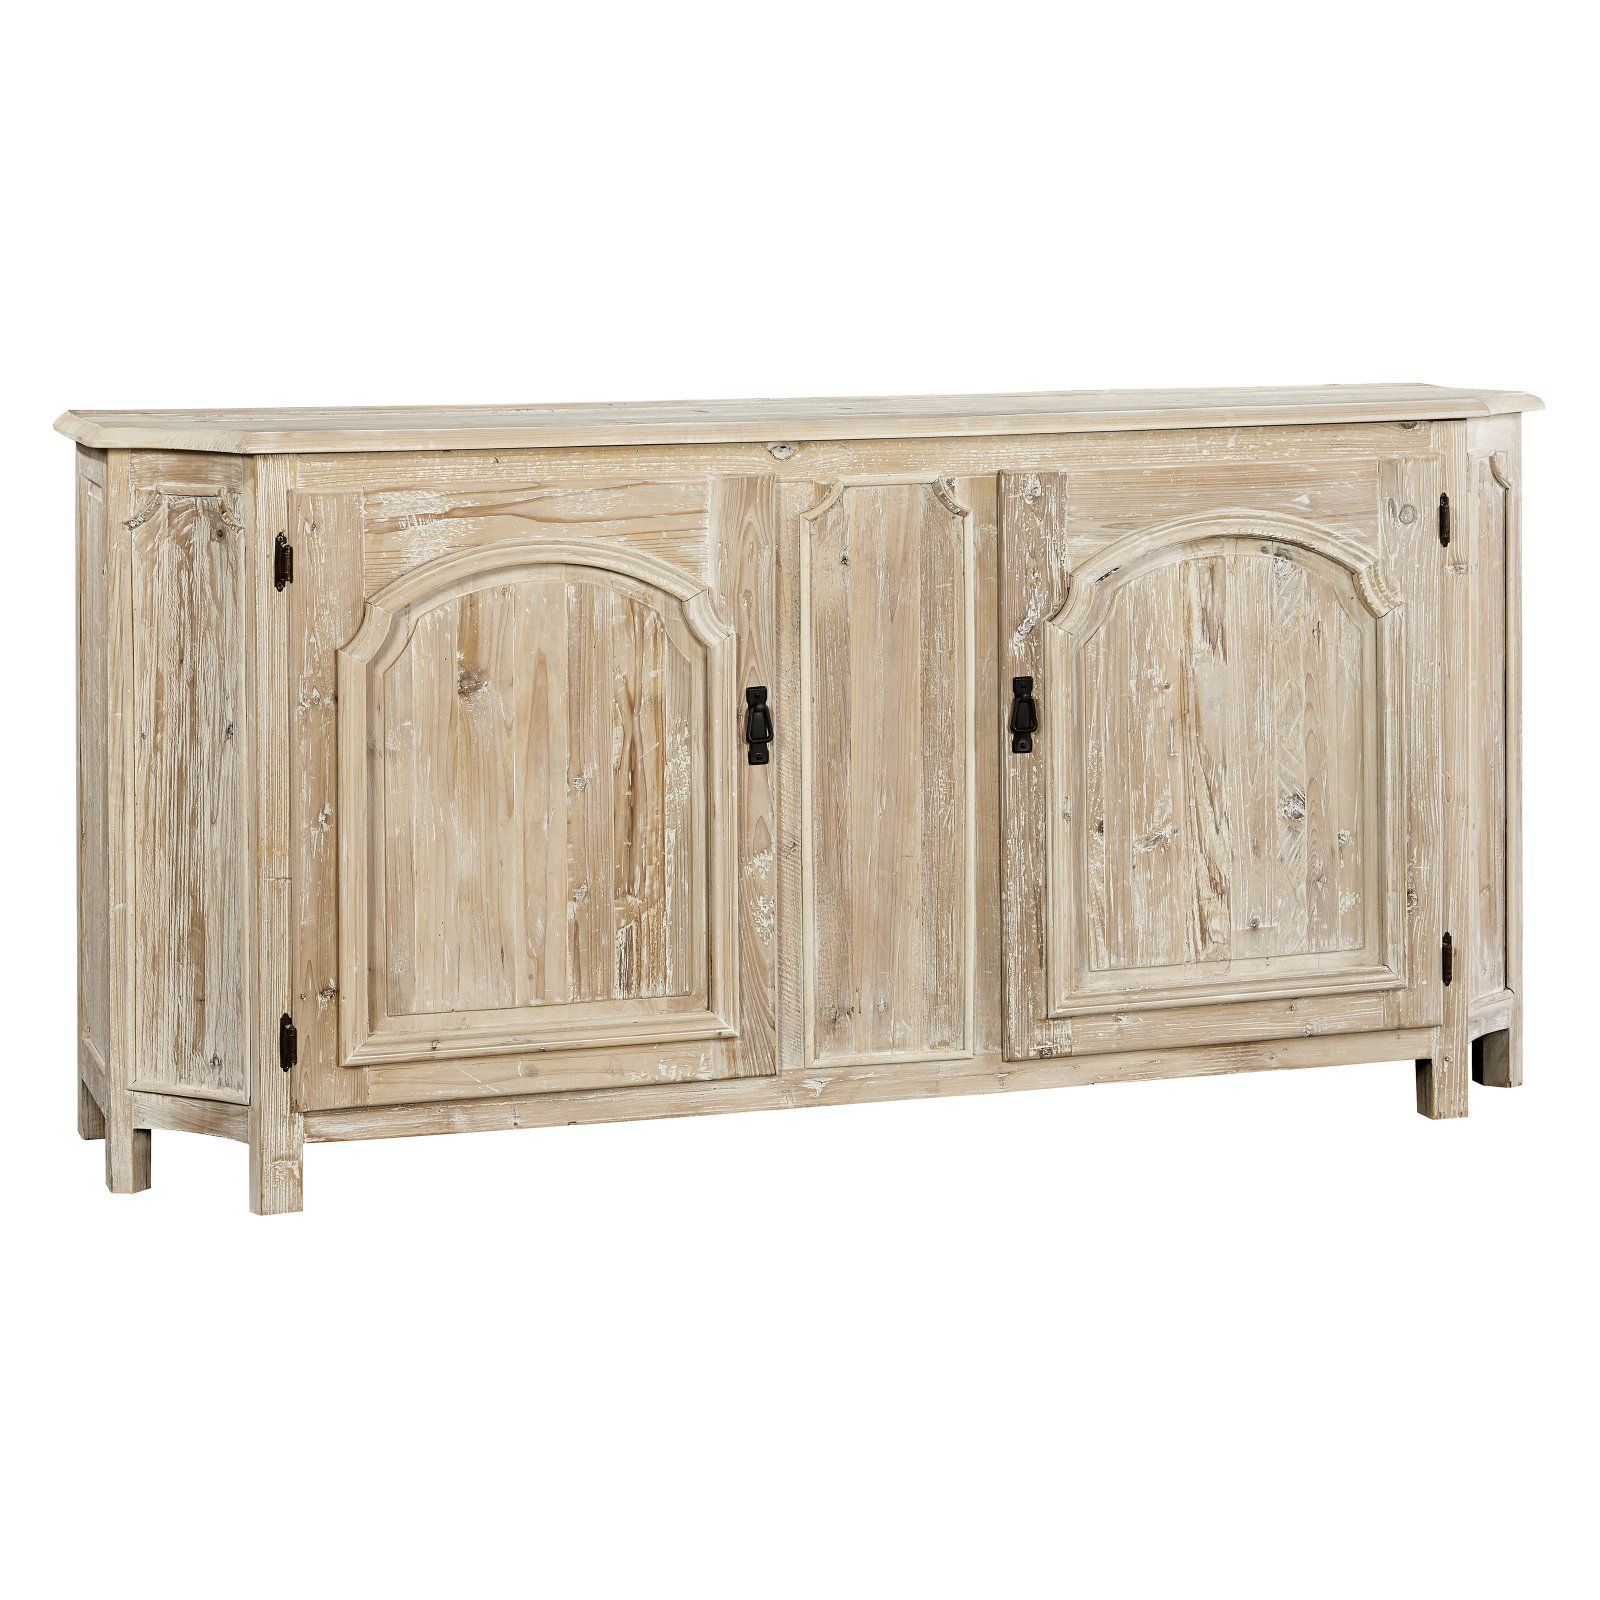 Sloane Elliot Abner Sideboard In 2019 | Products | Sideboard With Regard To Hayter Sideboards (View 6 of 30)